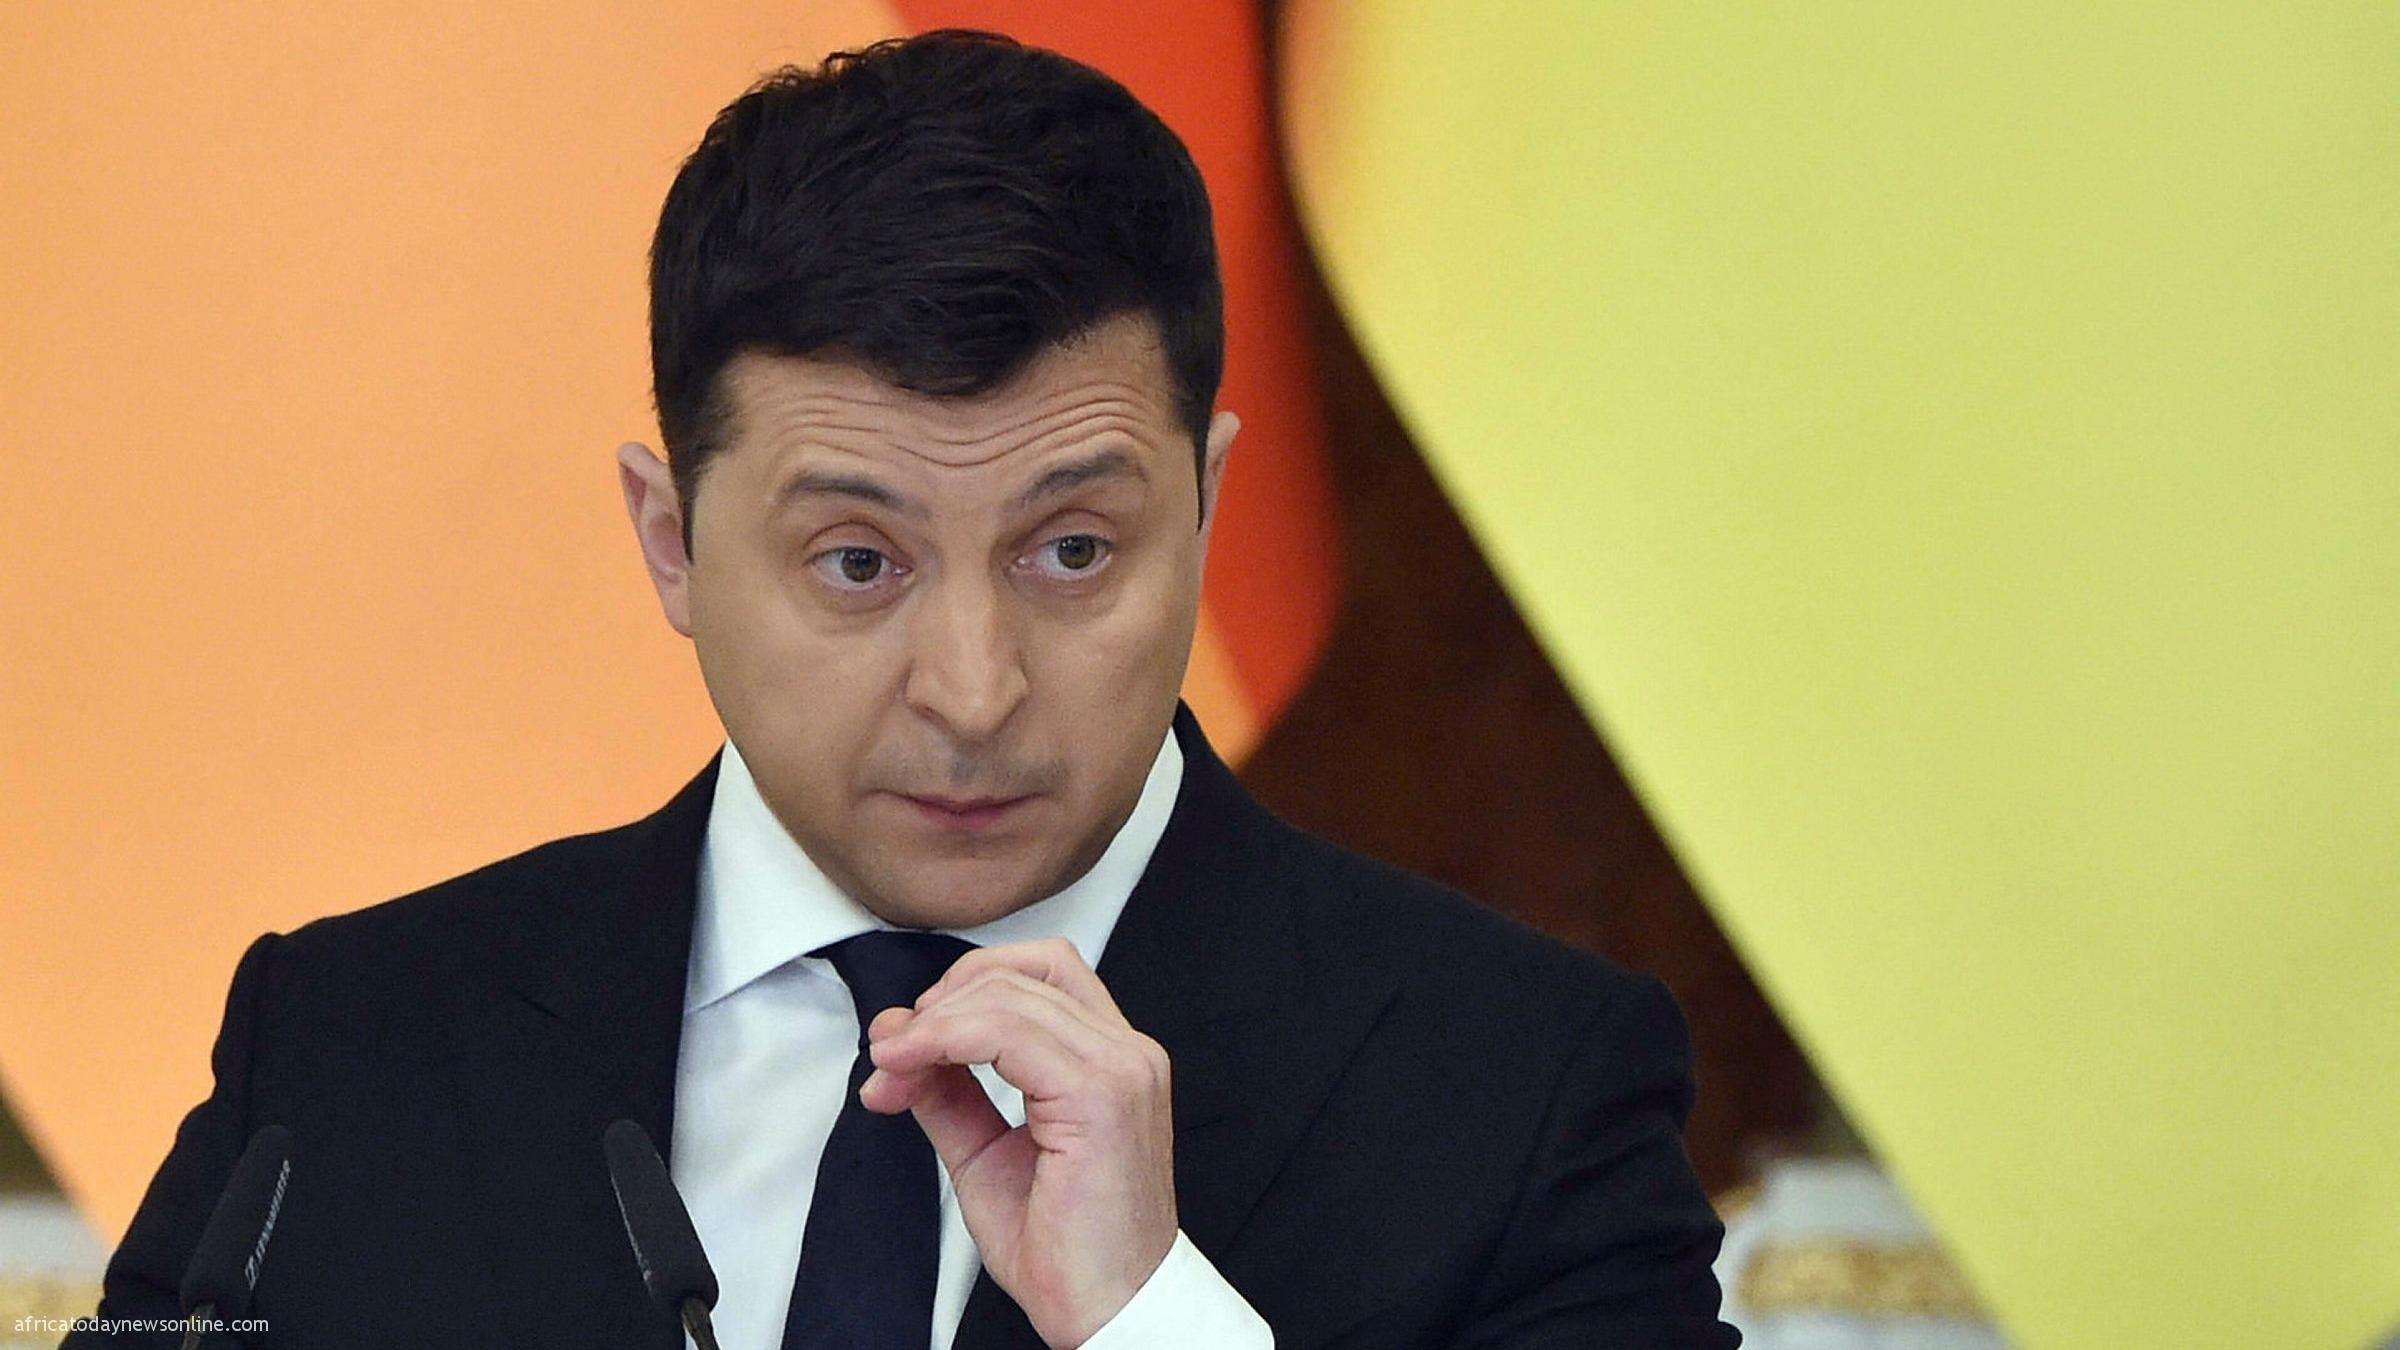 We Will Give Nothing To Russia, Ukrainian President Declares